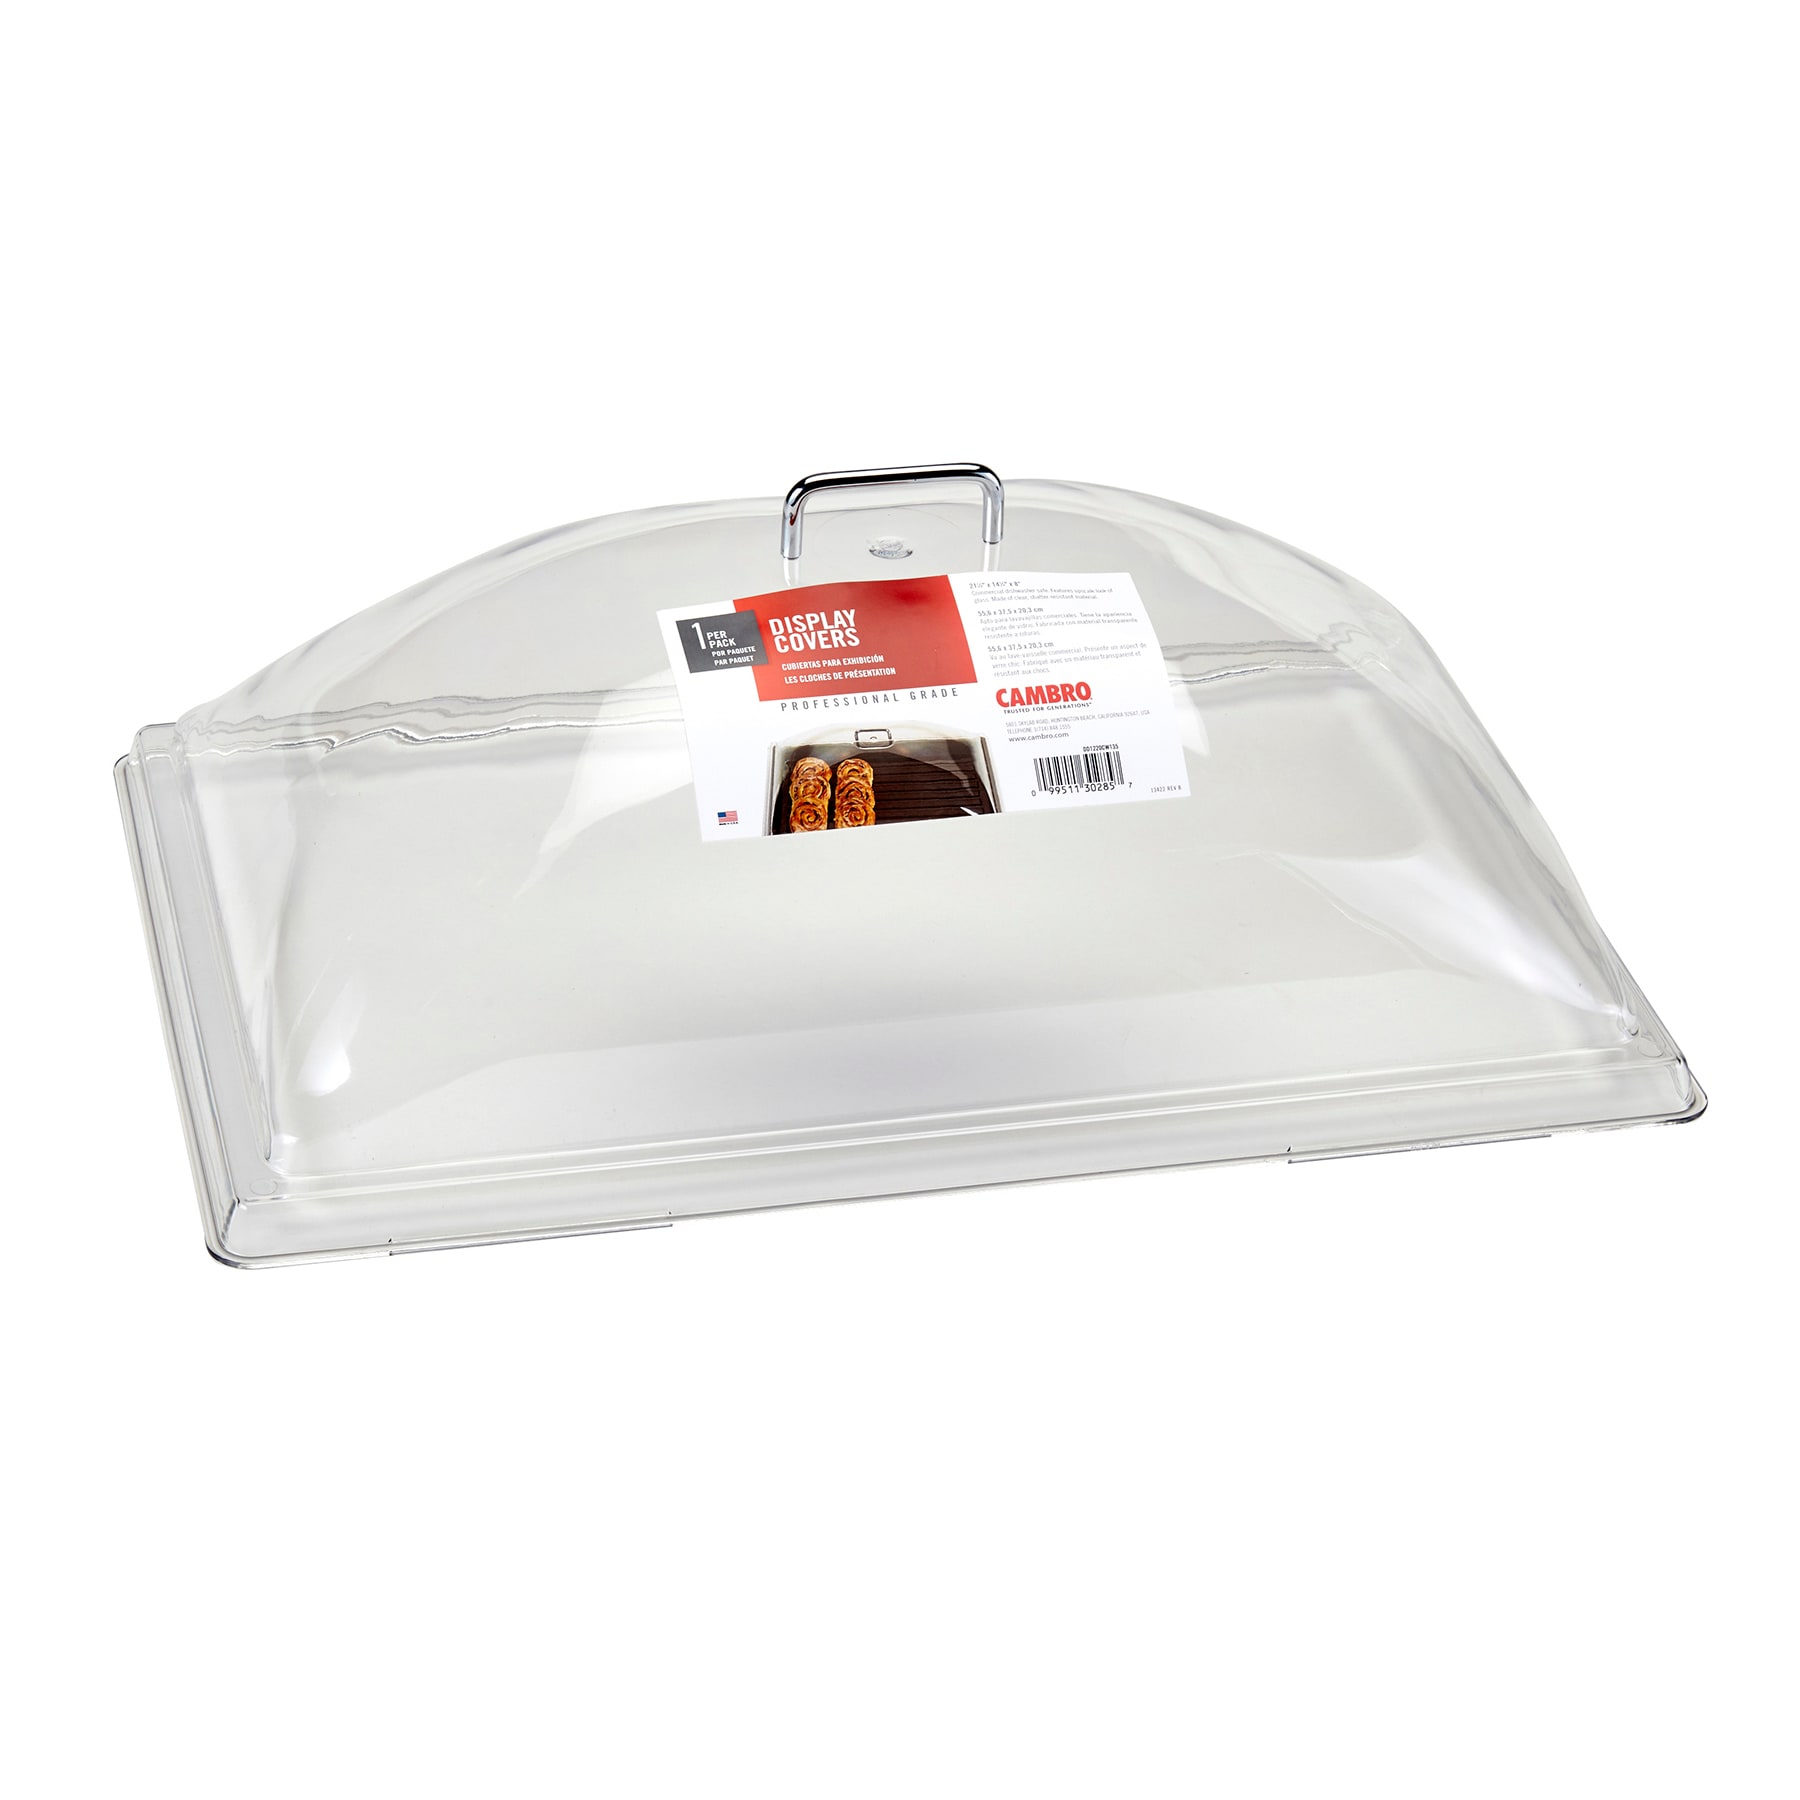 Display Tray Covers